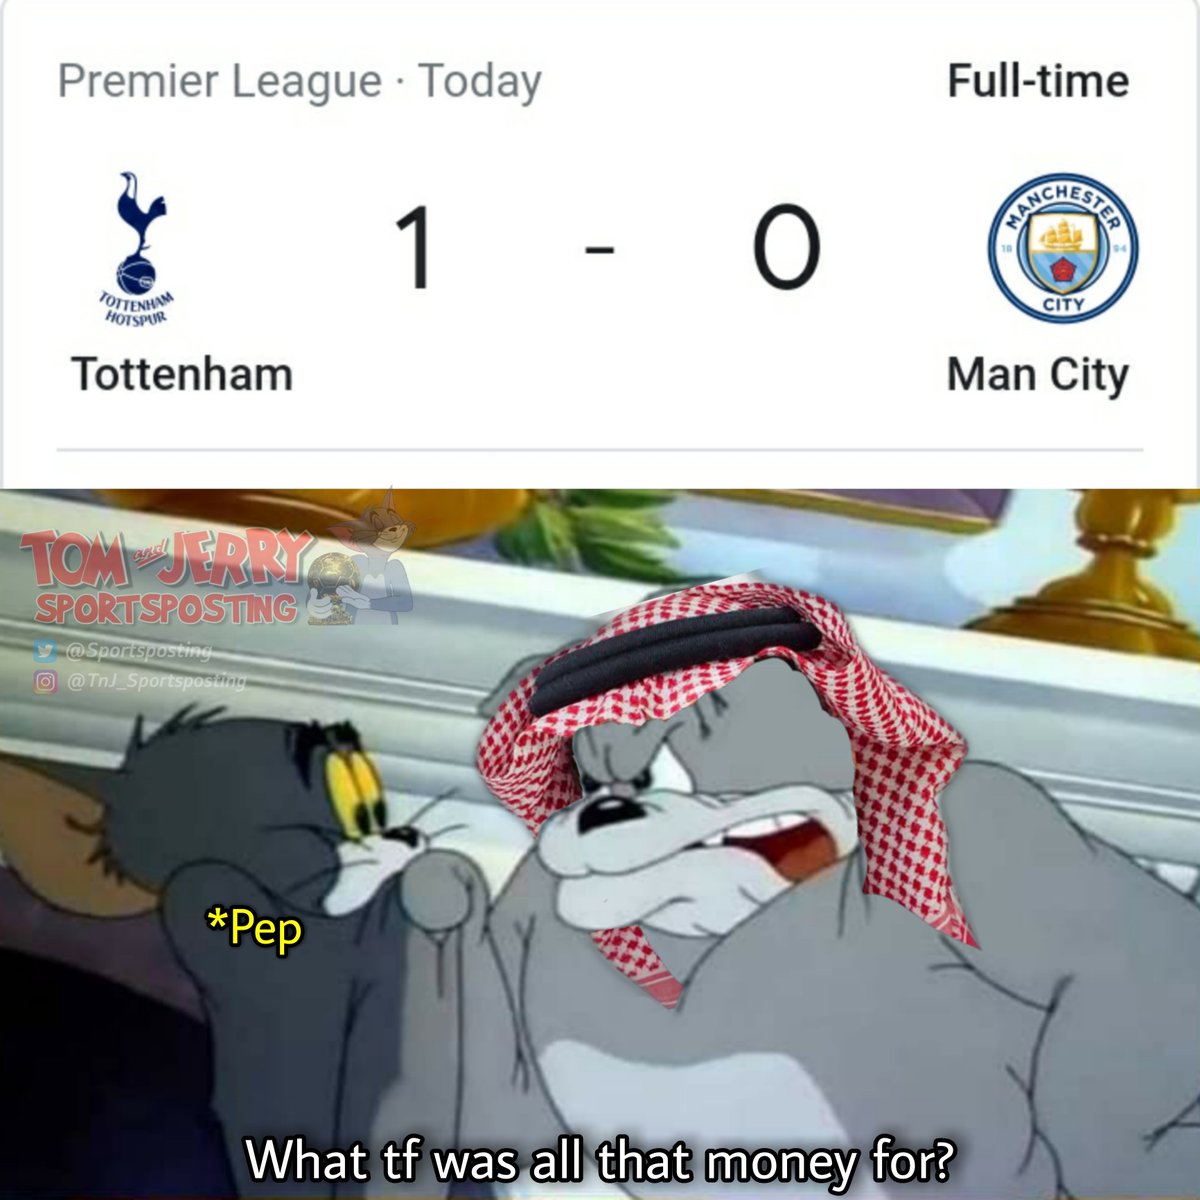 Started the 2021-22 campaign with a loss 😬 

#TottenhamManCity #TottenhamHotspur #Tottenham #mancity #ManchesterCity #PremierLeague